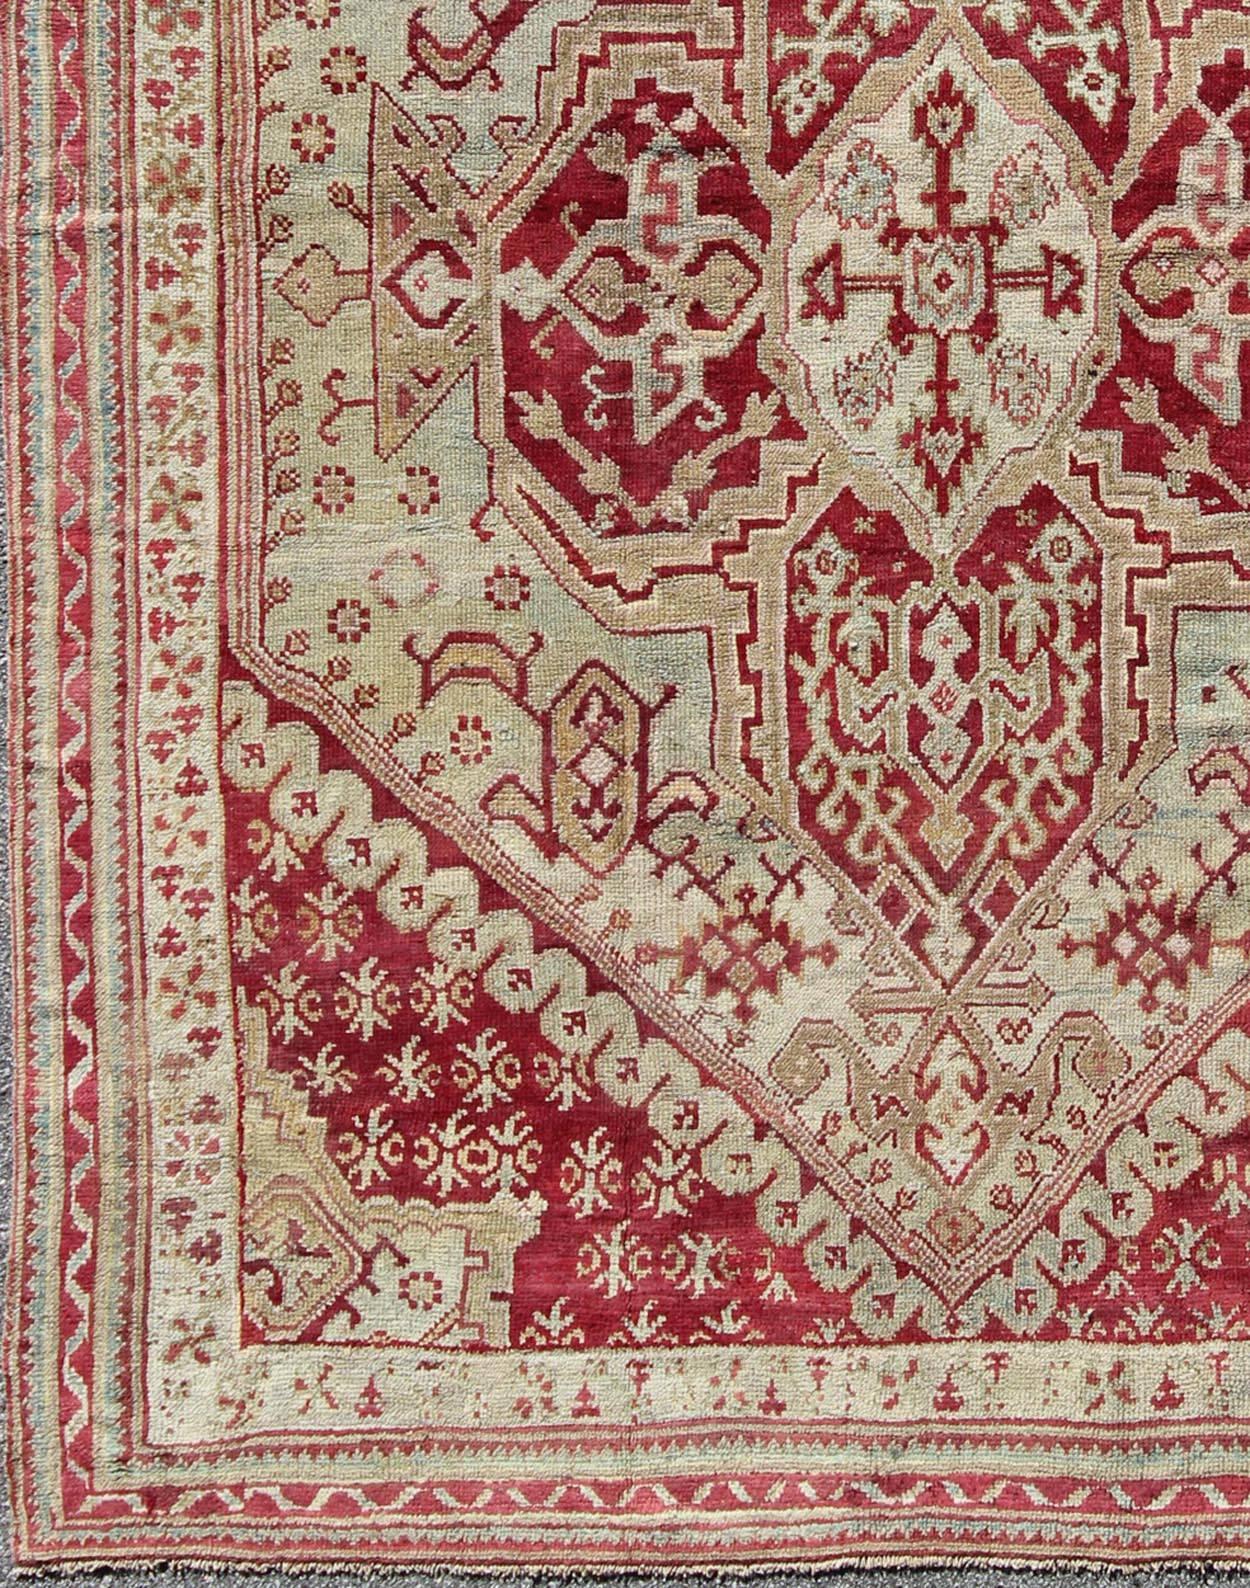  Antique Turkish Ghiordes,  from 19th Century Oushak area in Raspberry Red, Ice Blue & L. Green and geometric medallion, corners and borders                                  

Antique Turkish Ghiordes Rug, Keivan Woven Arts/rug/ D-0904, country of